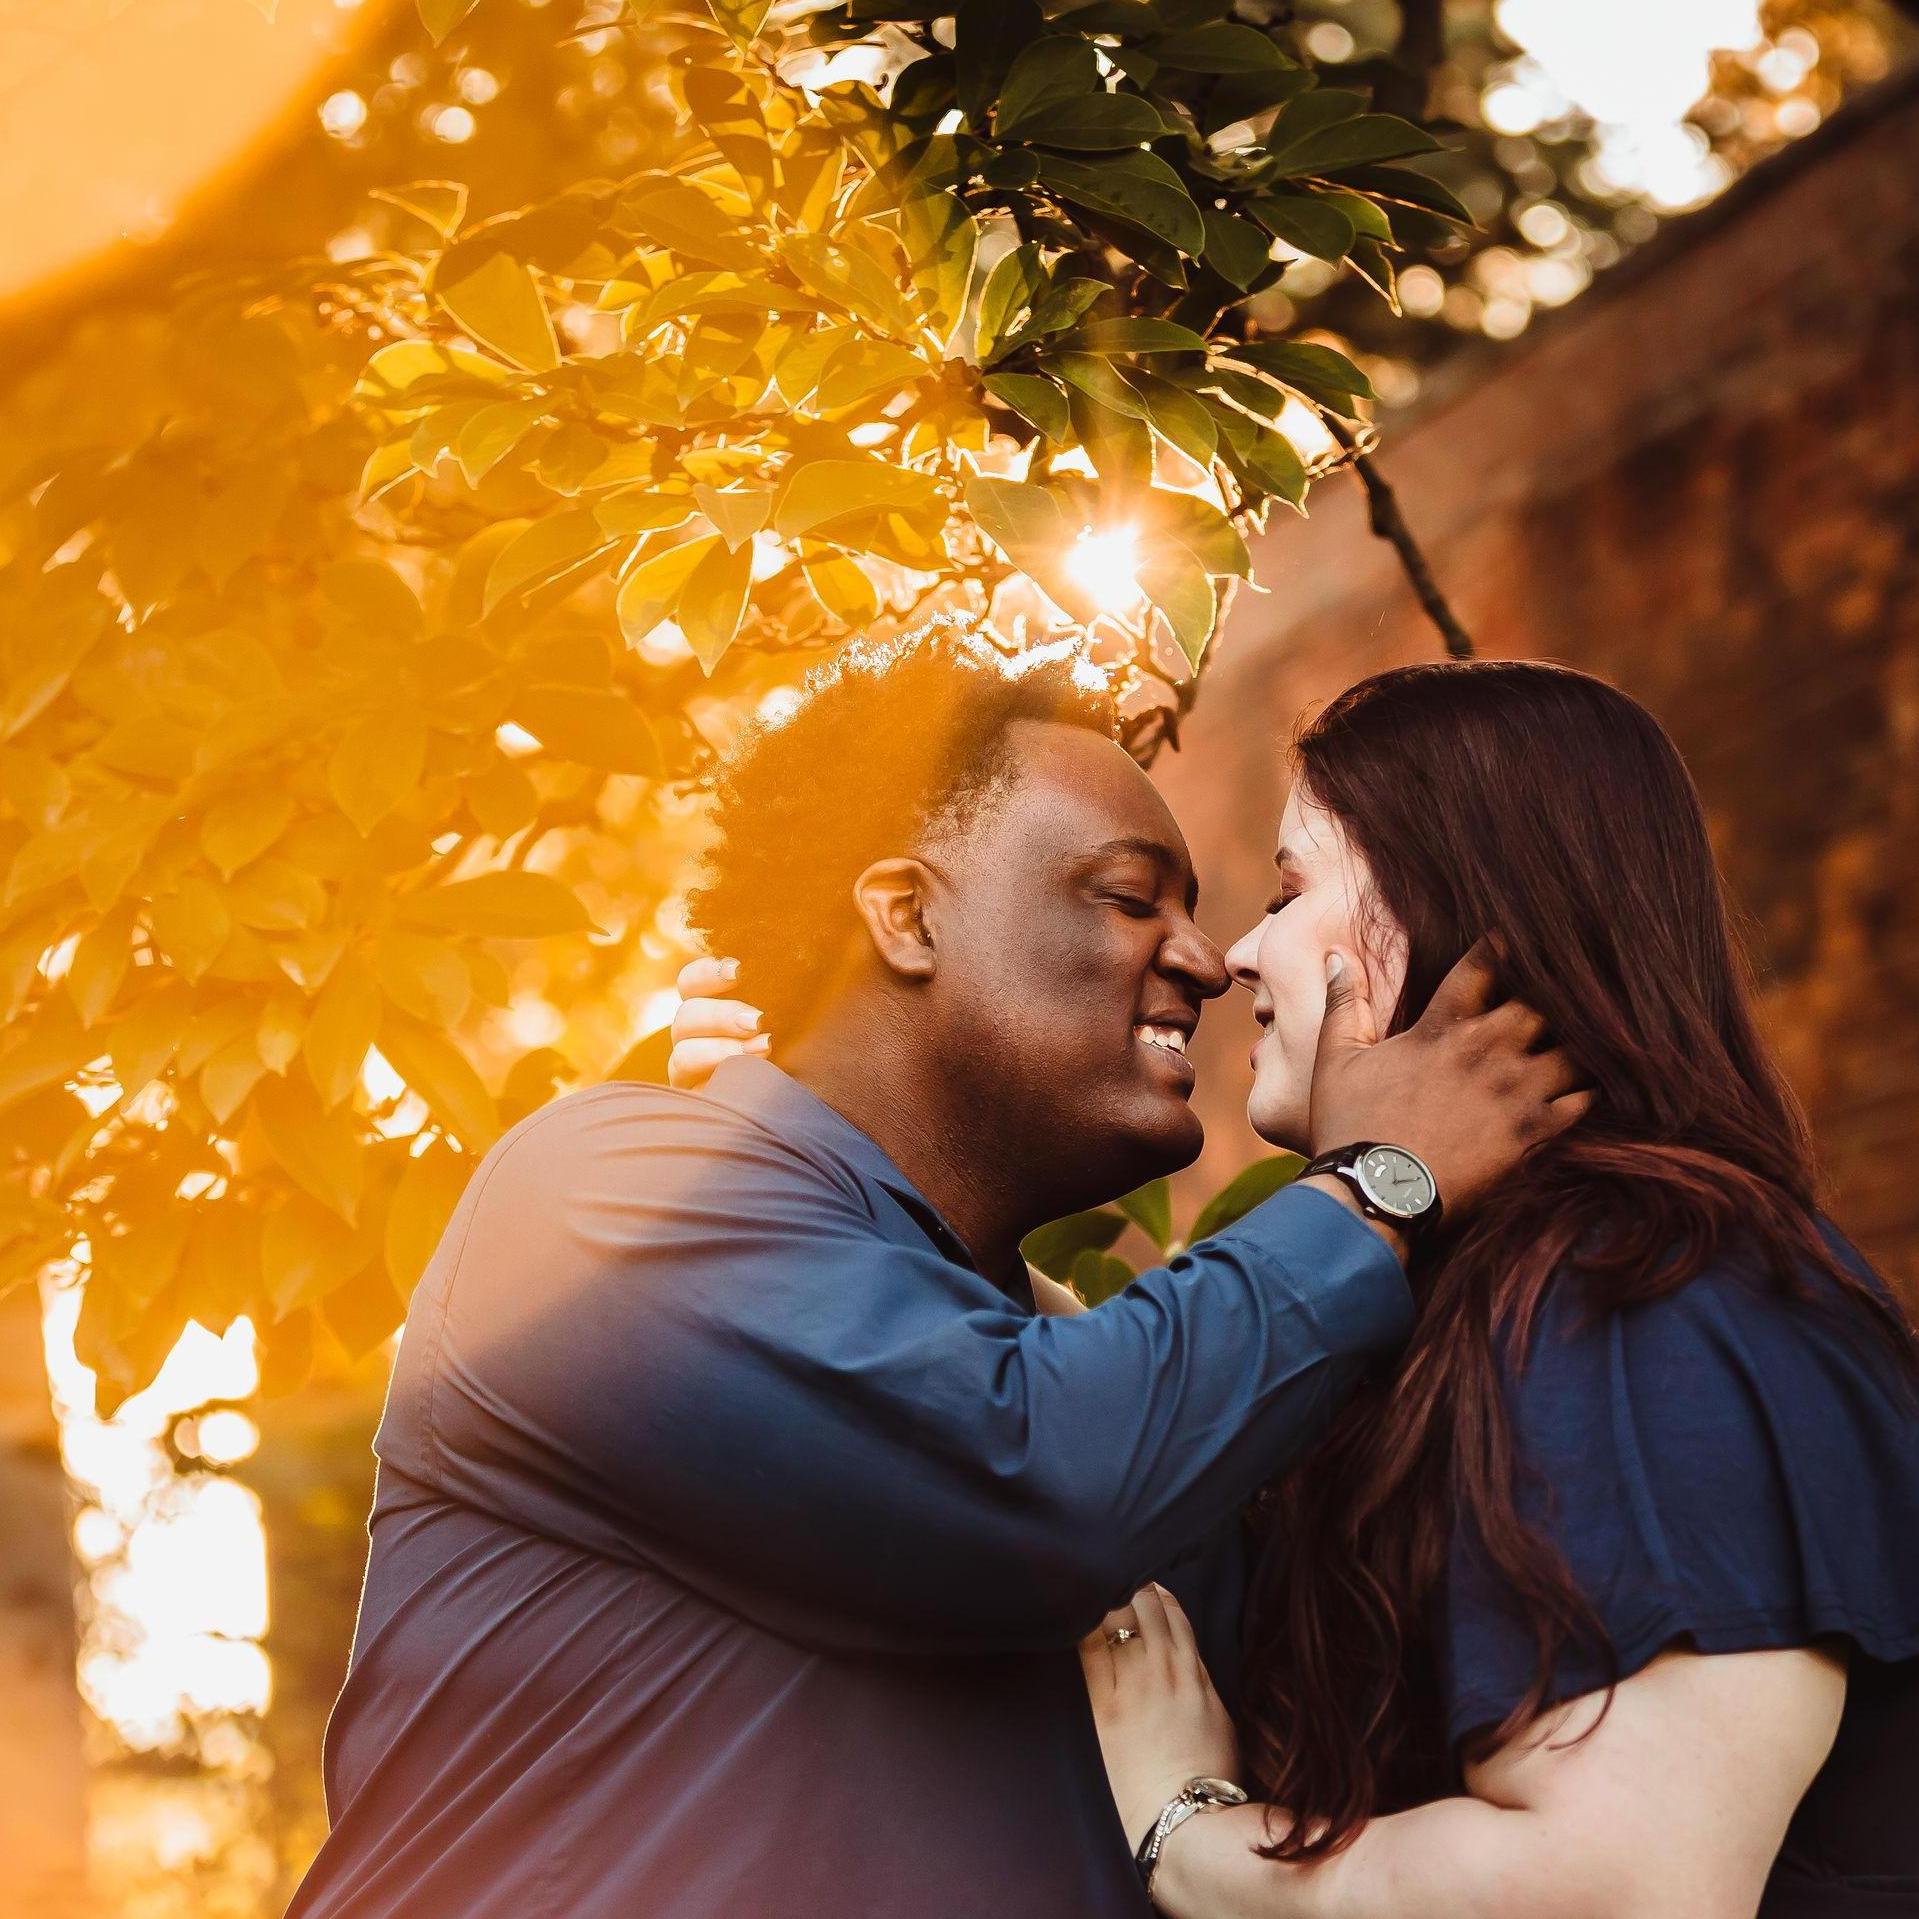 We had such a good time with our engagement shoot! I can't wait for our photographer to capture our special day!